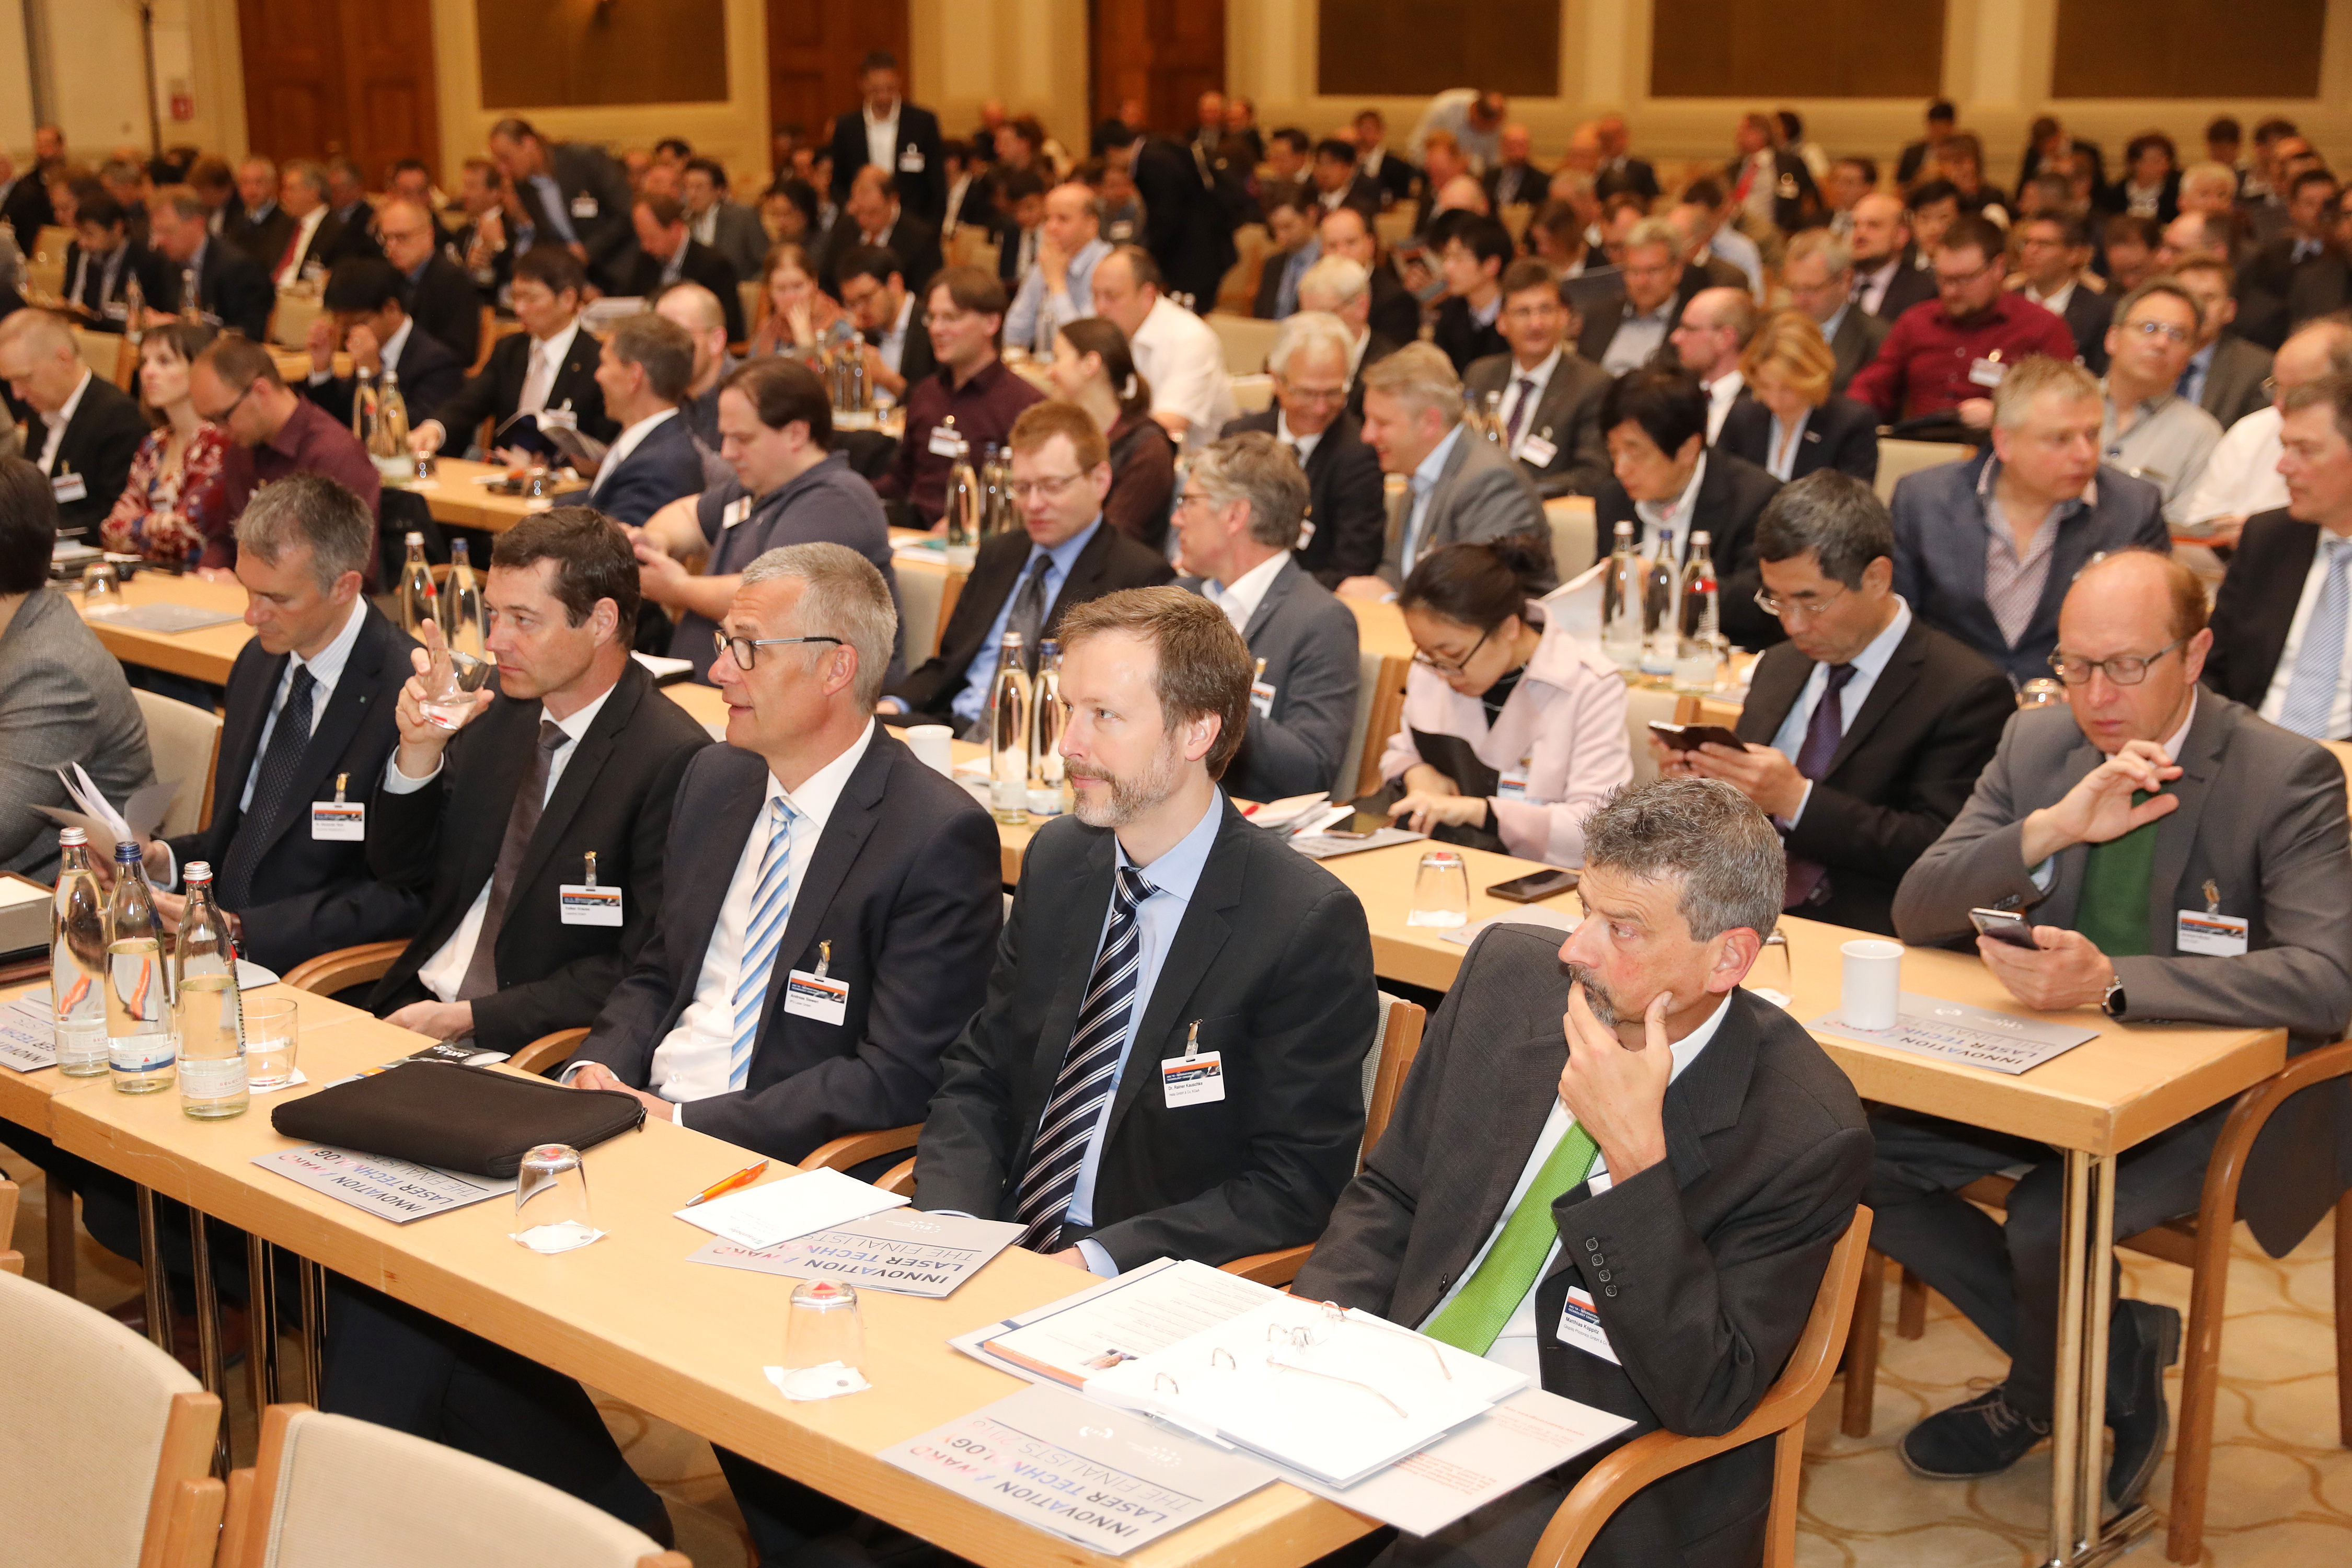 More than 660 attendees met at AKL’18 in Aachen, Germany.